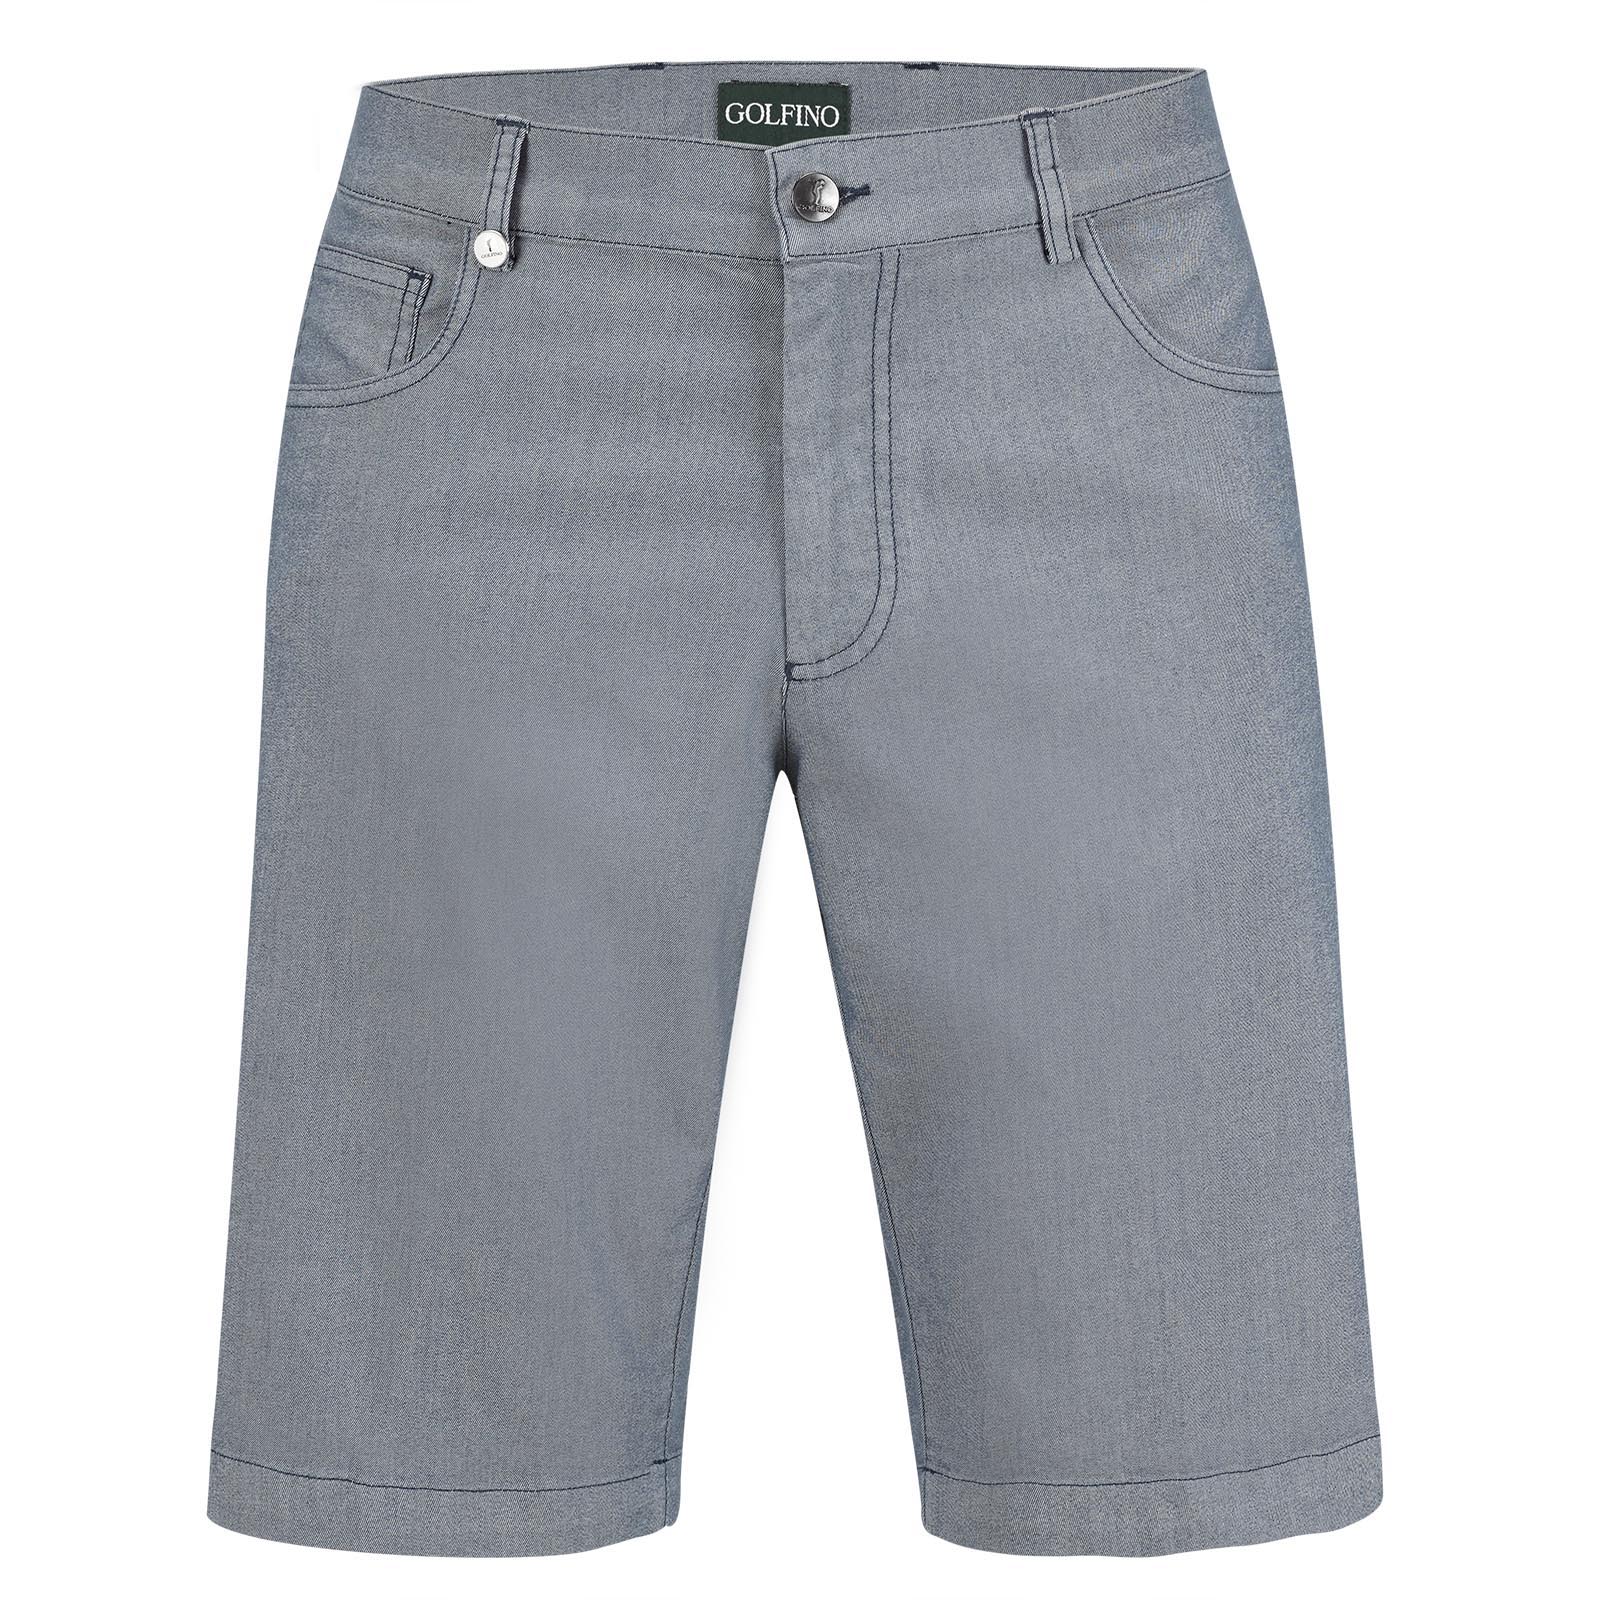 Men's shorts in five-pocket style